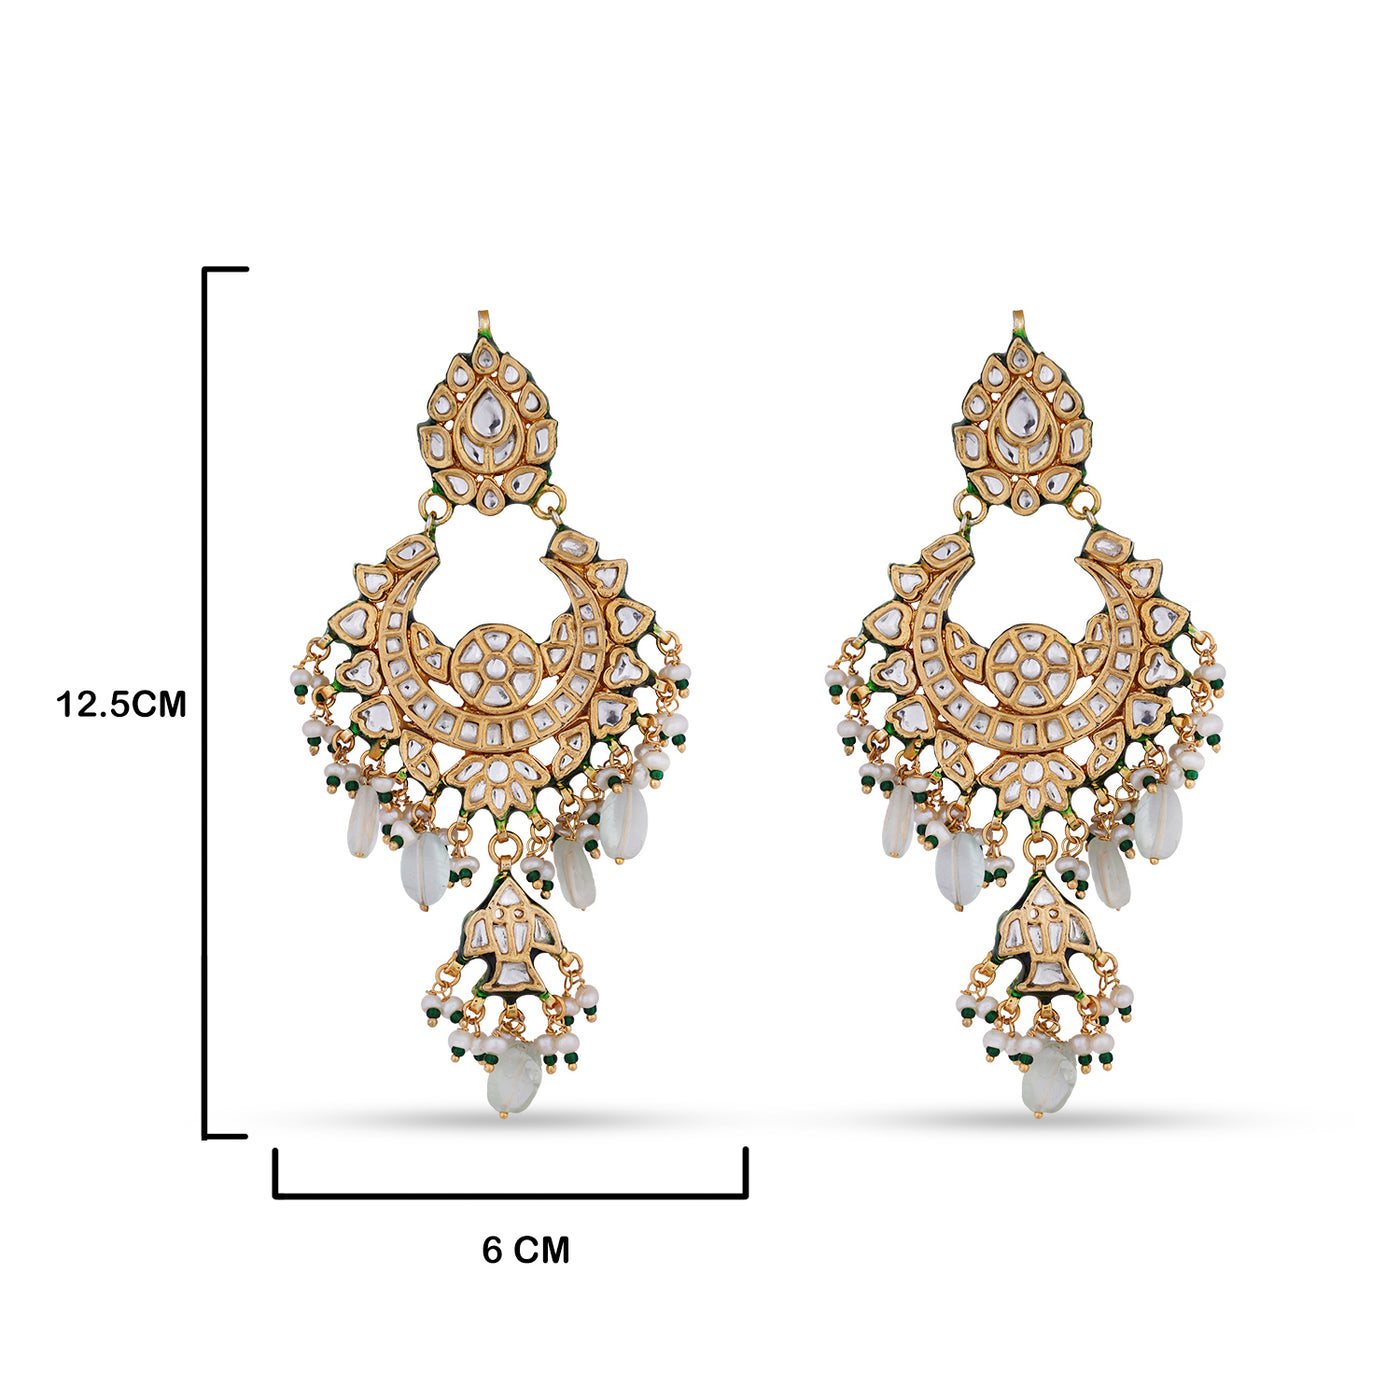 Green and White Bead Kundan Earrings with measurements in cm. 12.5cm by 6cm.